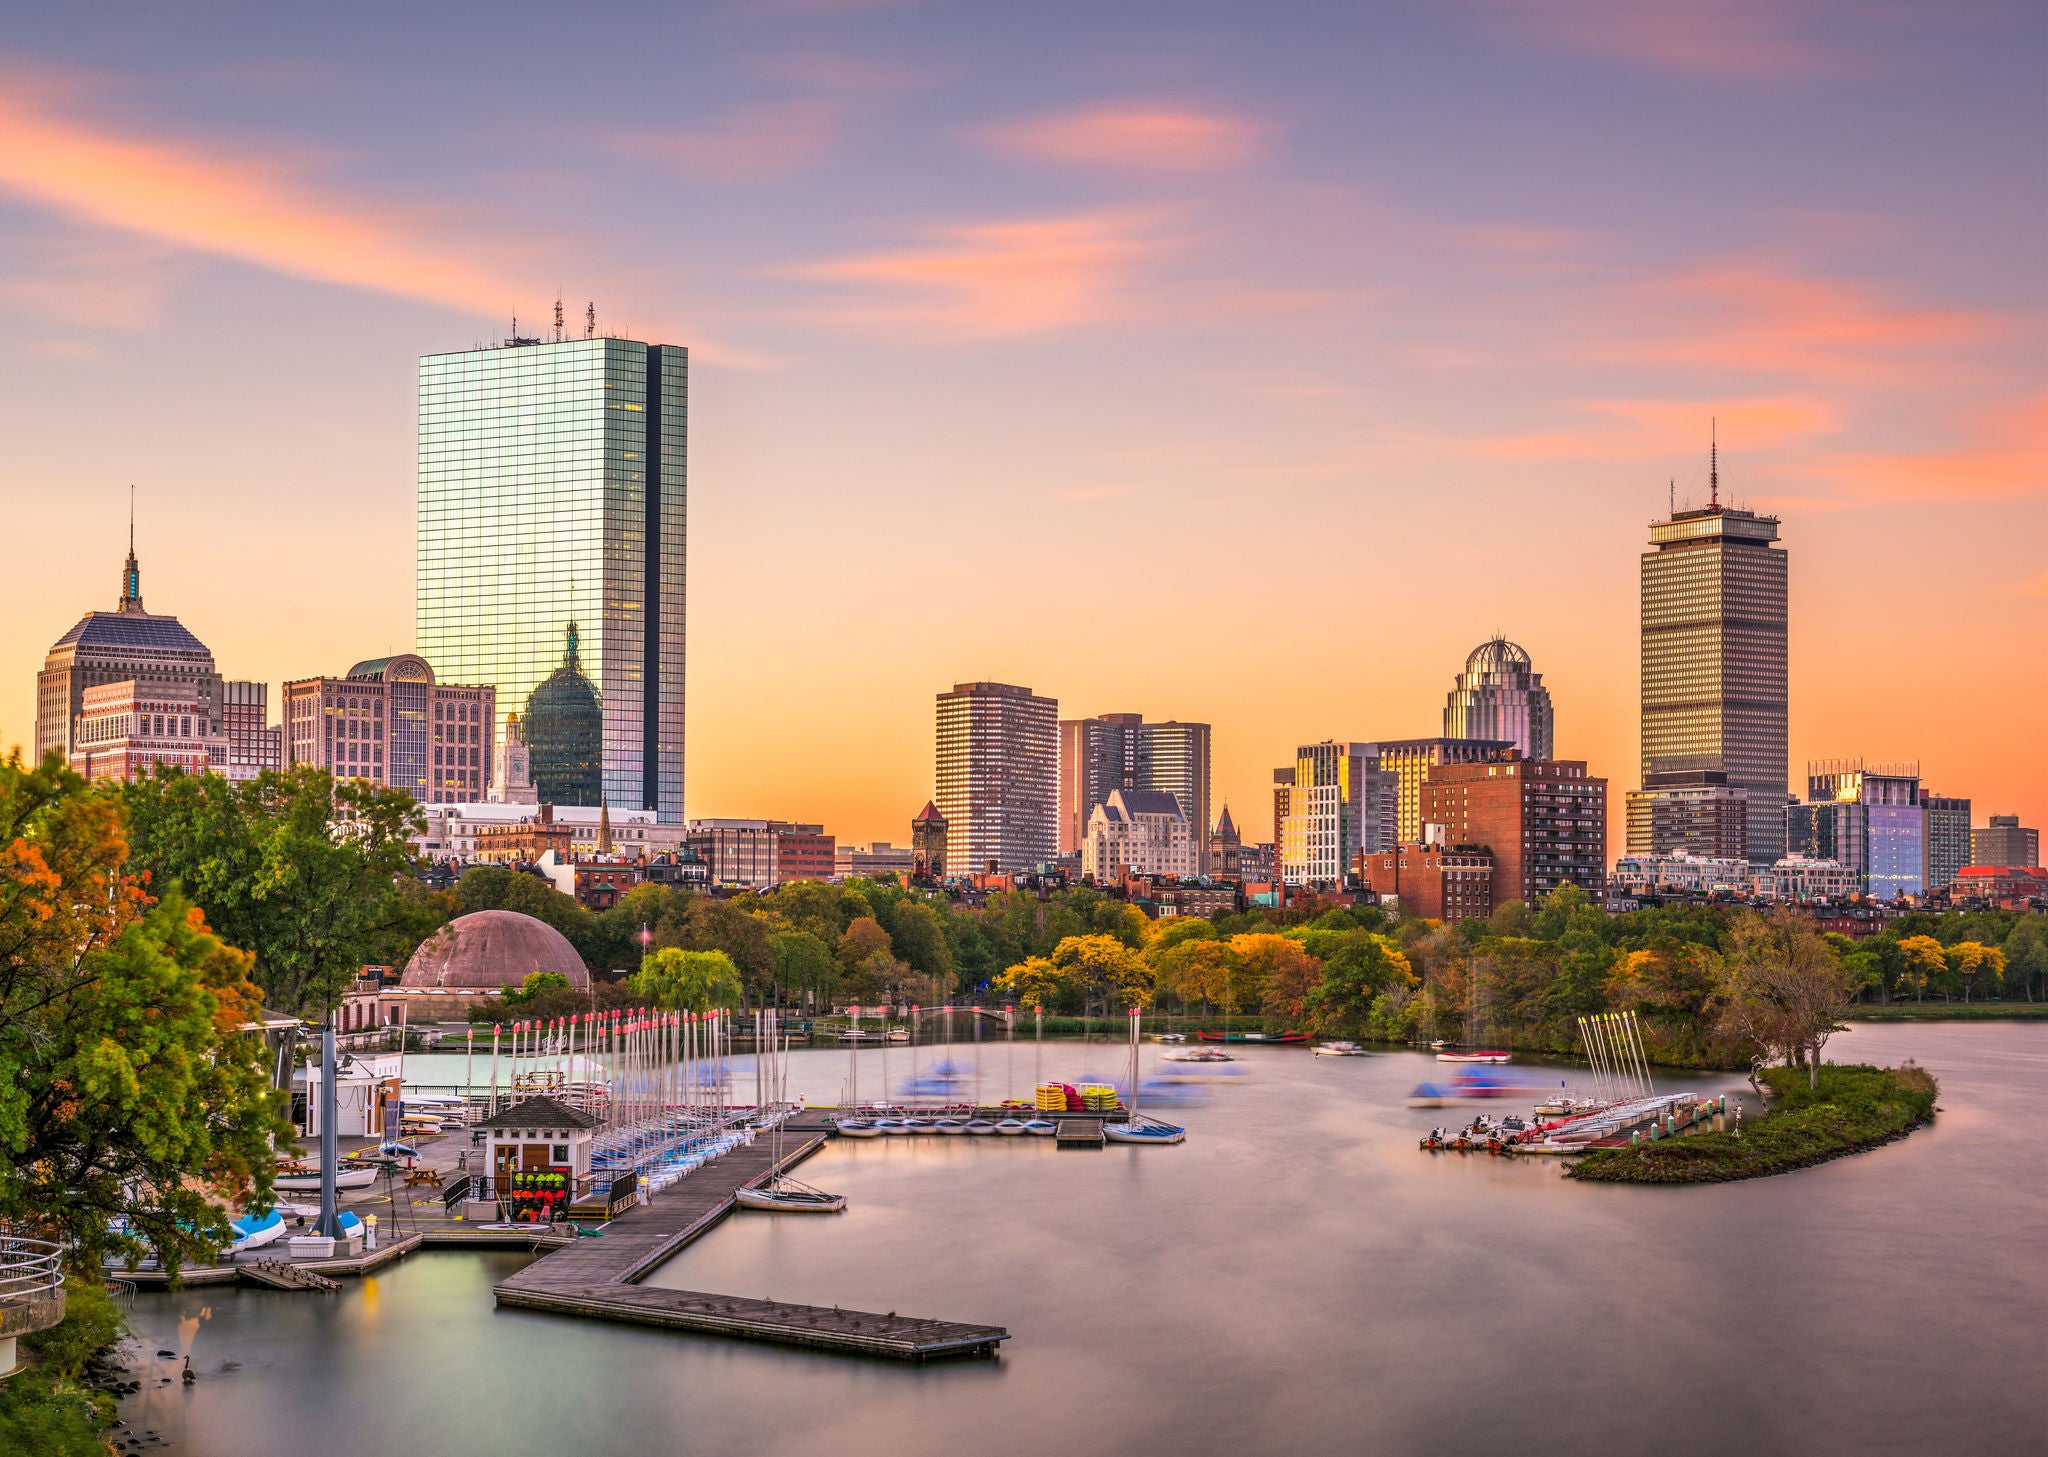 Boston, Massachusetts, skyline at dawn with the harbor in the foreground.